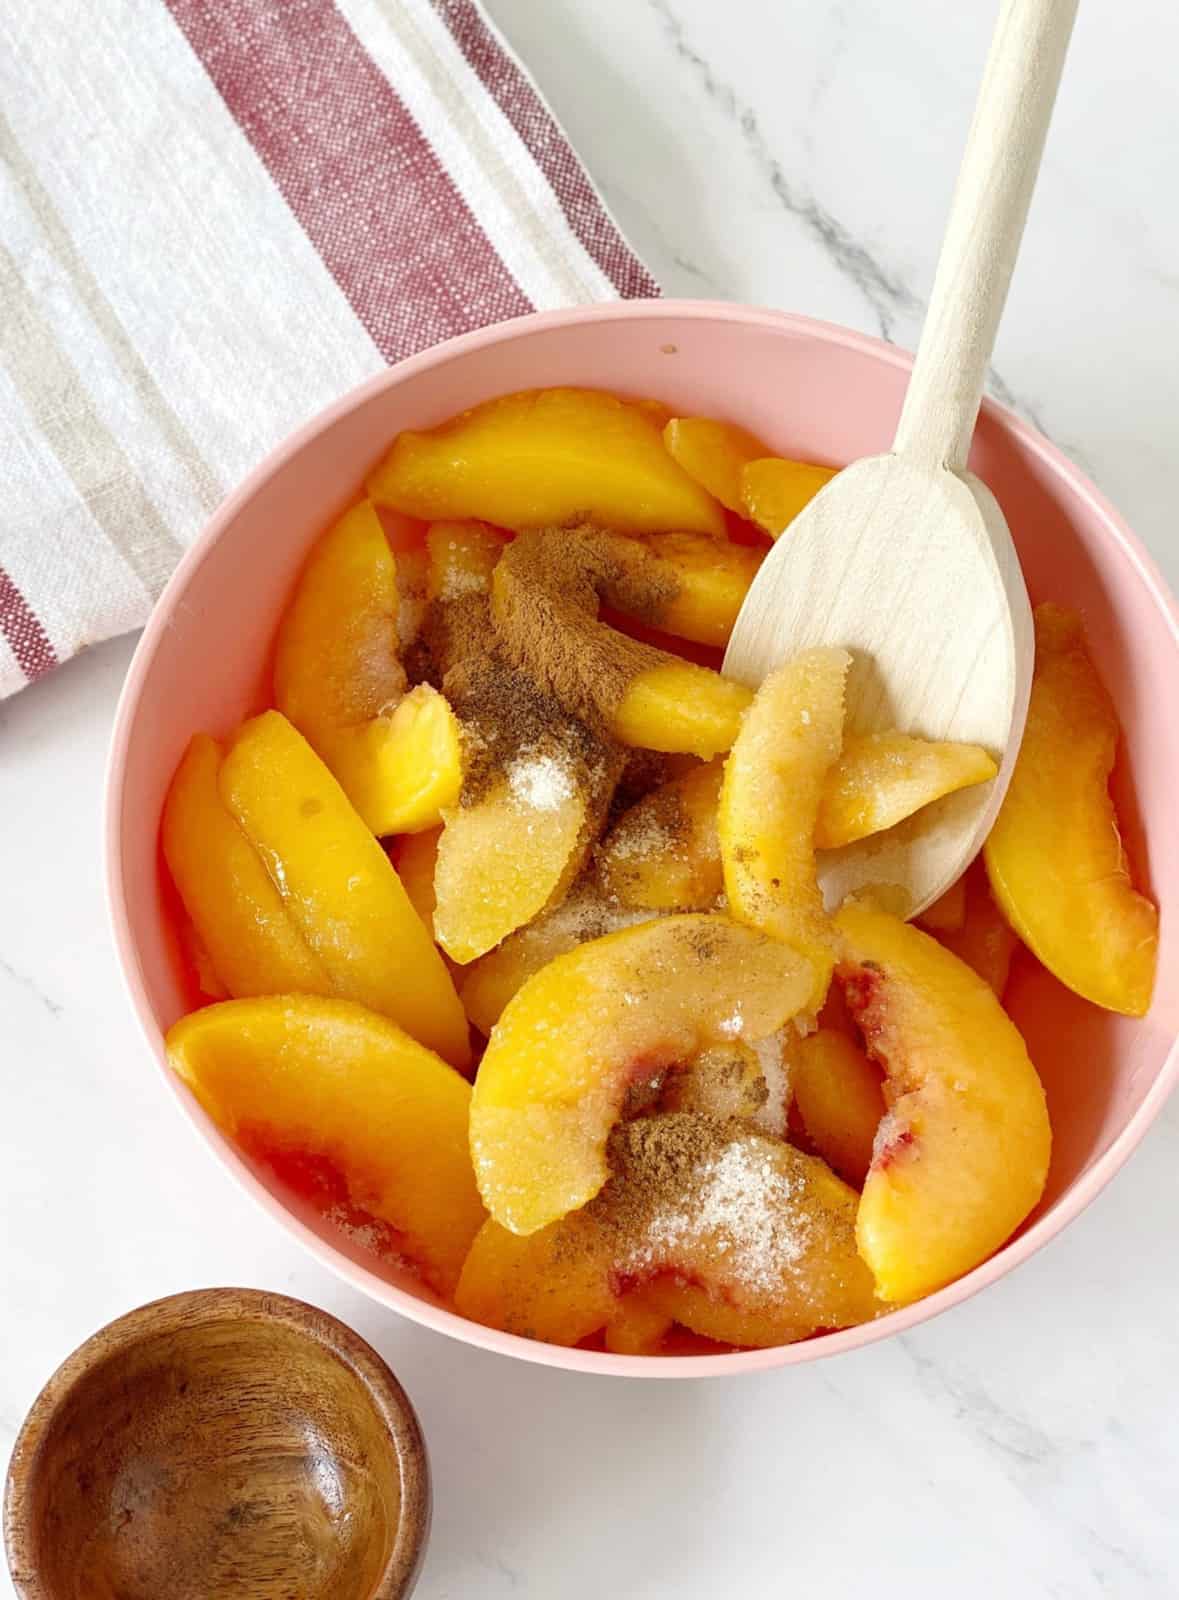 bowl of peaches with brown sugar and ciannmon spices